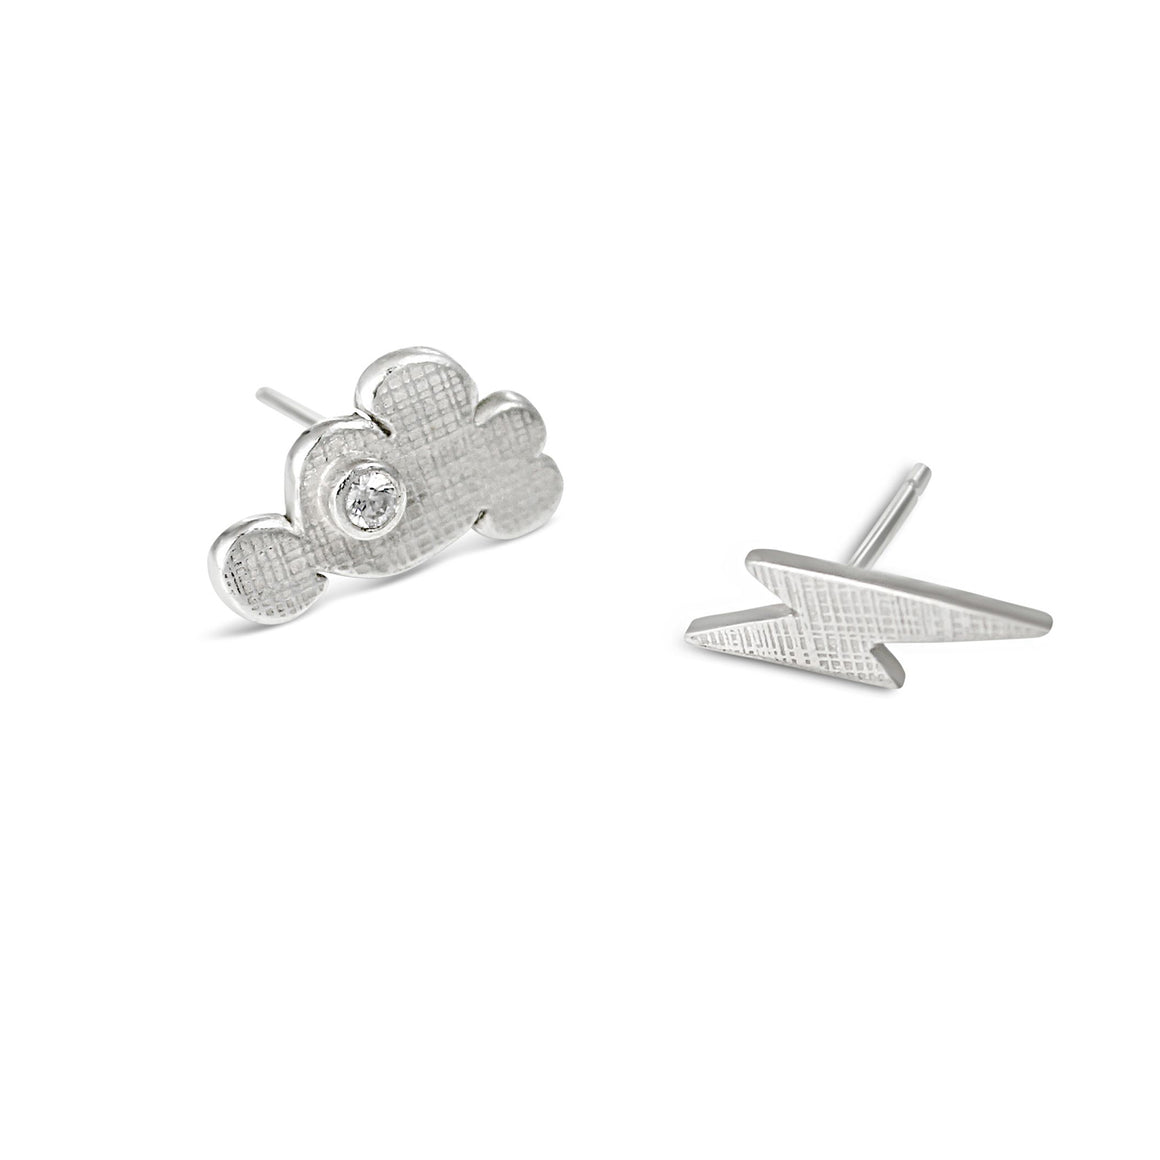 Cloud and Lightning Earrings Silver